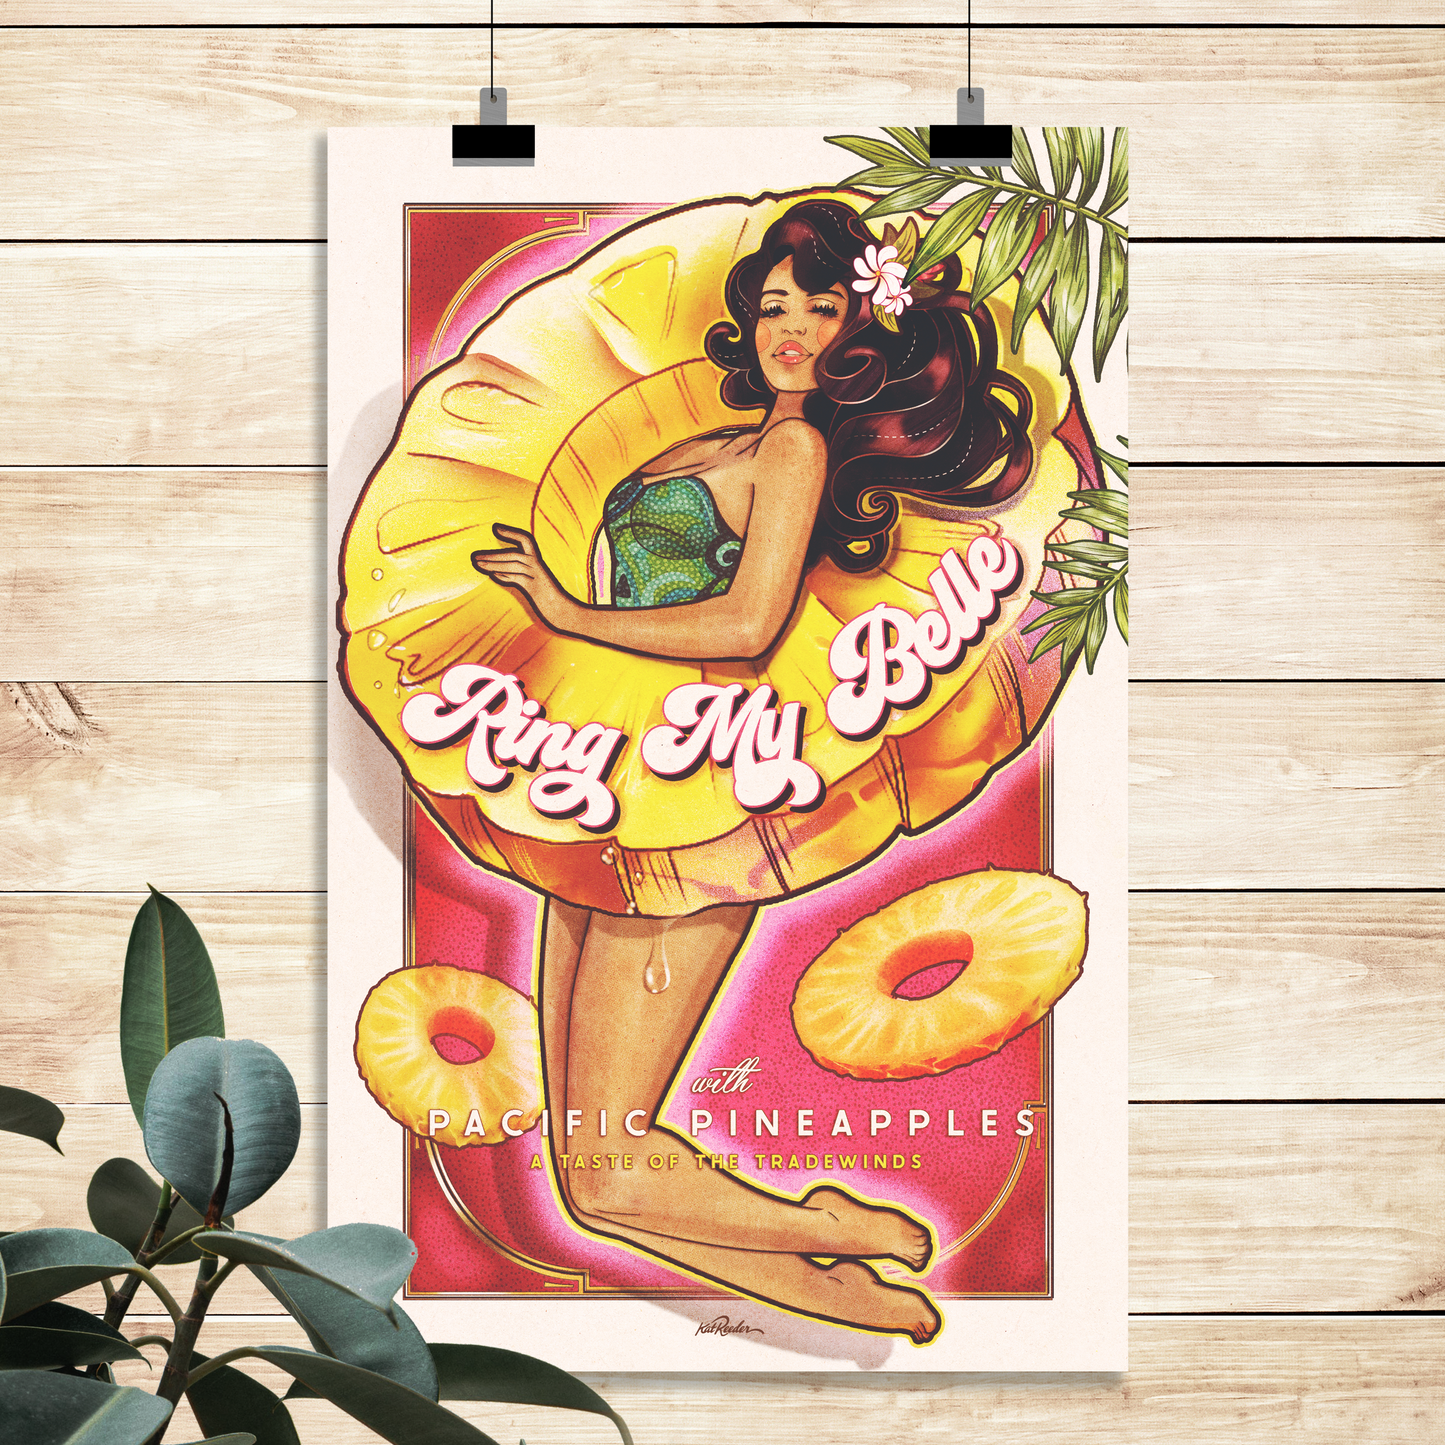 flat lay mockup of a vintage style pin up poster featuring a woman with a pinapple ring. This vintage fruit poster is in the style of american pin up and art nouveau